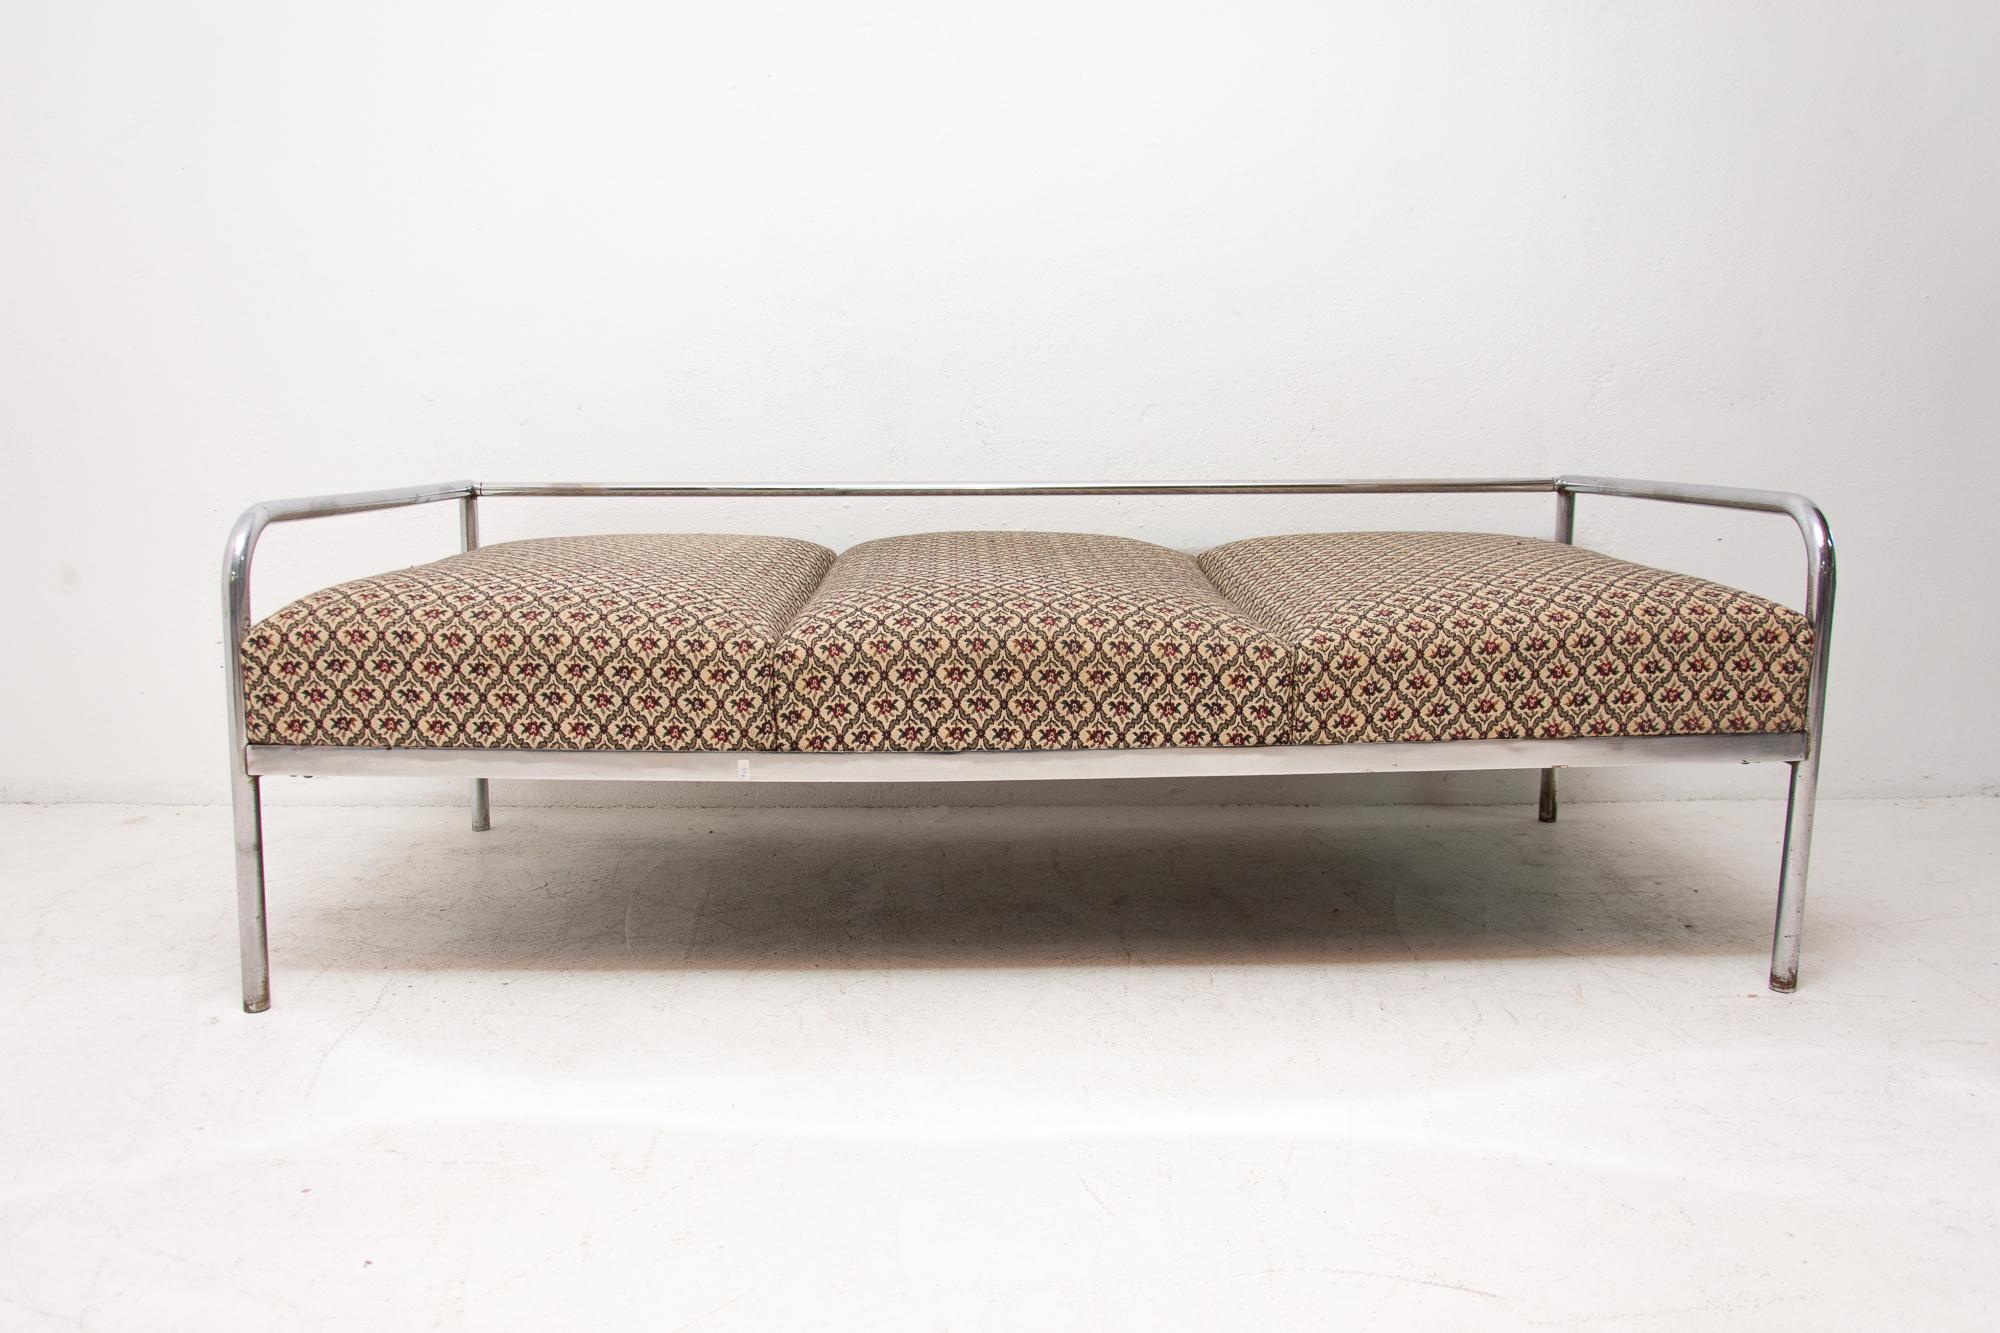 Chromed sofa from the Bauhaus period, 1930s, Bohemia. It was made by Robert Slezák company. Chrome and upholstery are in good Vintage condition, bears signs of age and using.